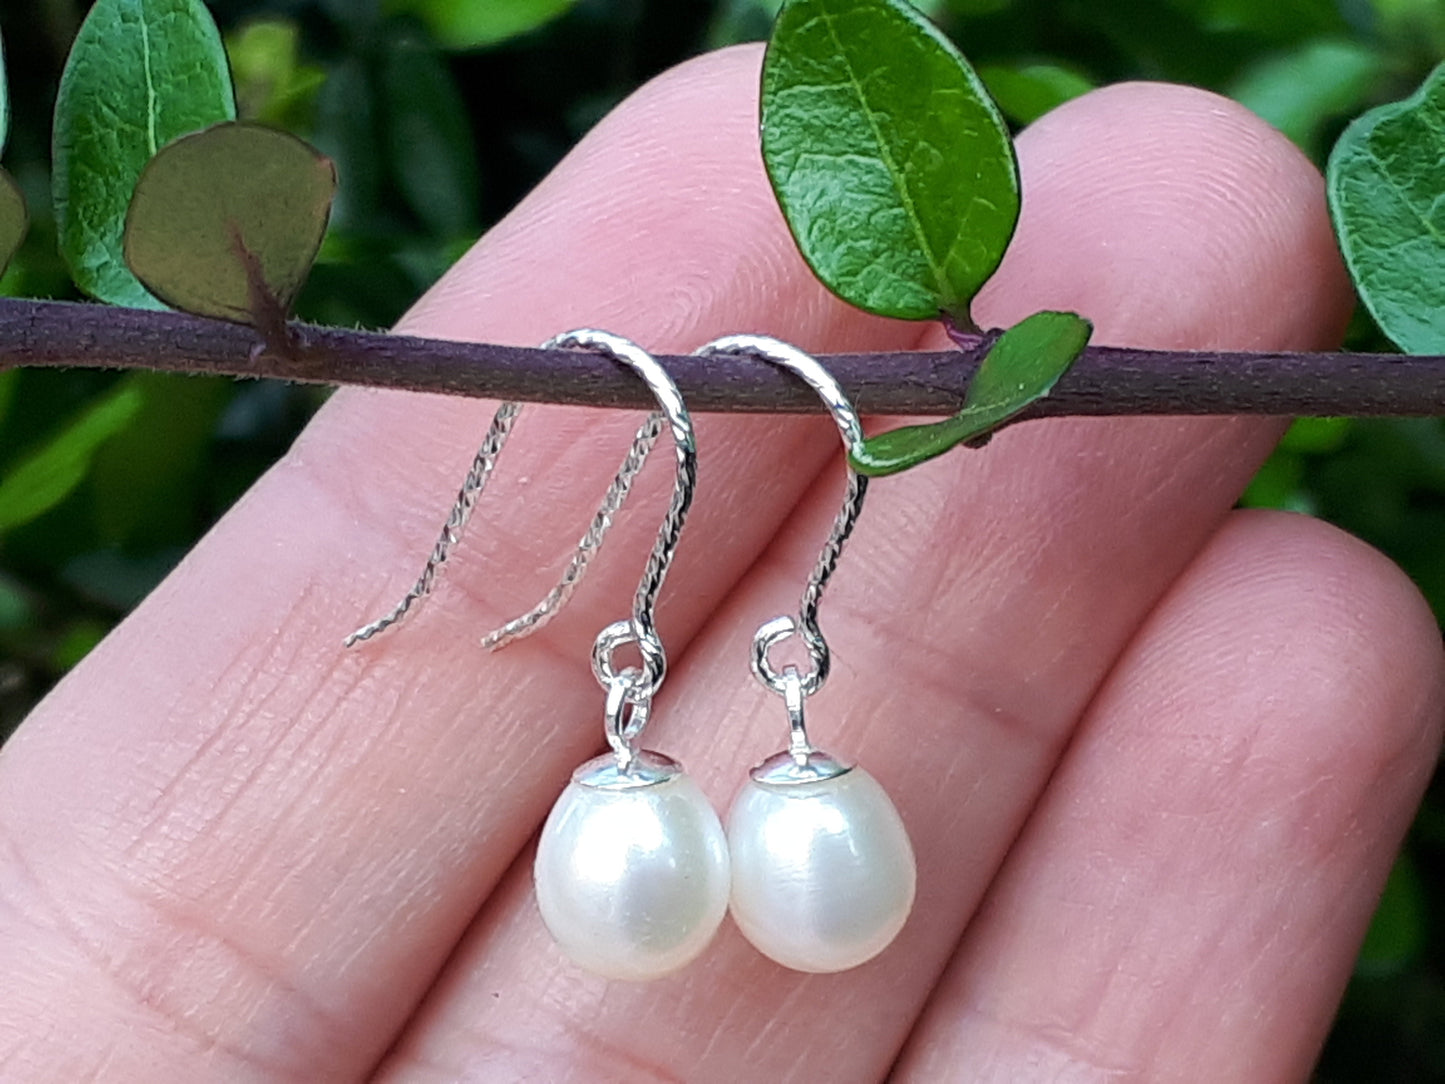 Silver and pearl drop earrings.